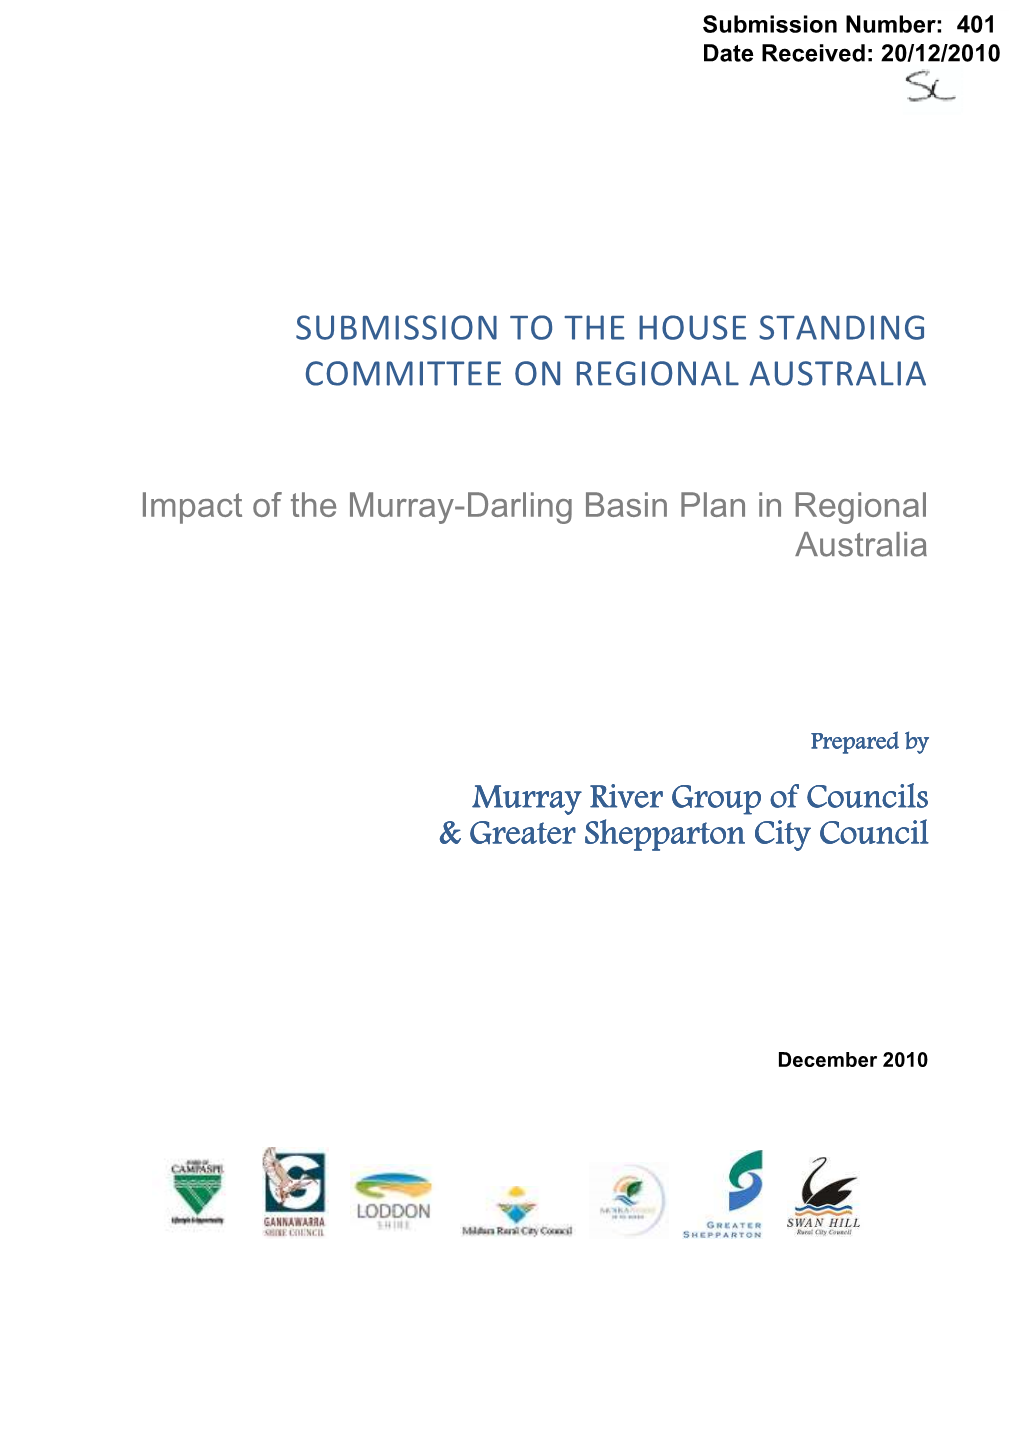 Submission to the House Standing Committee on Regional Australia